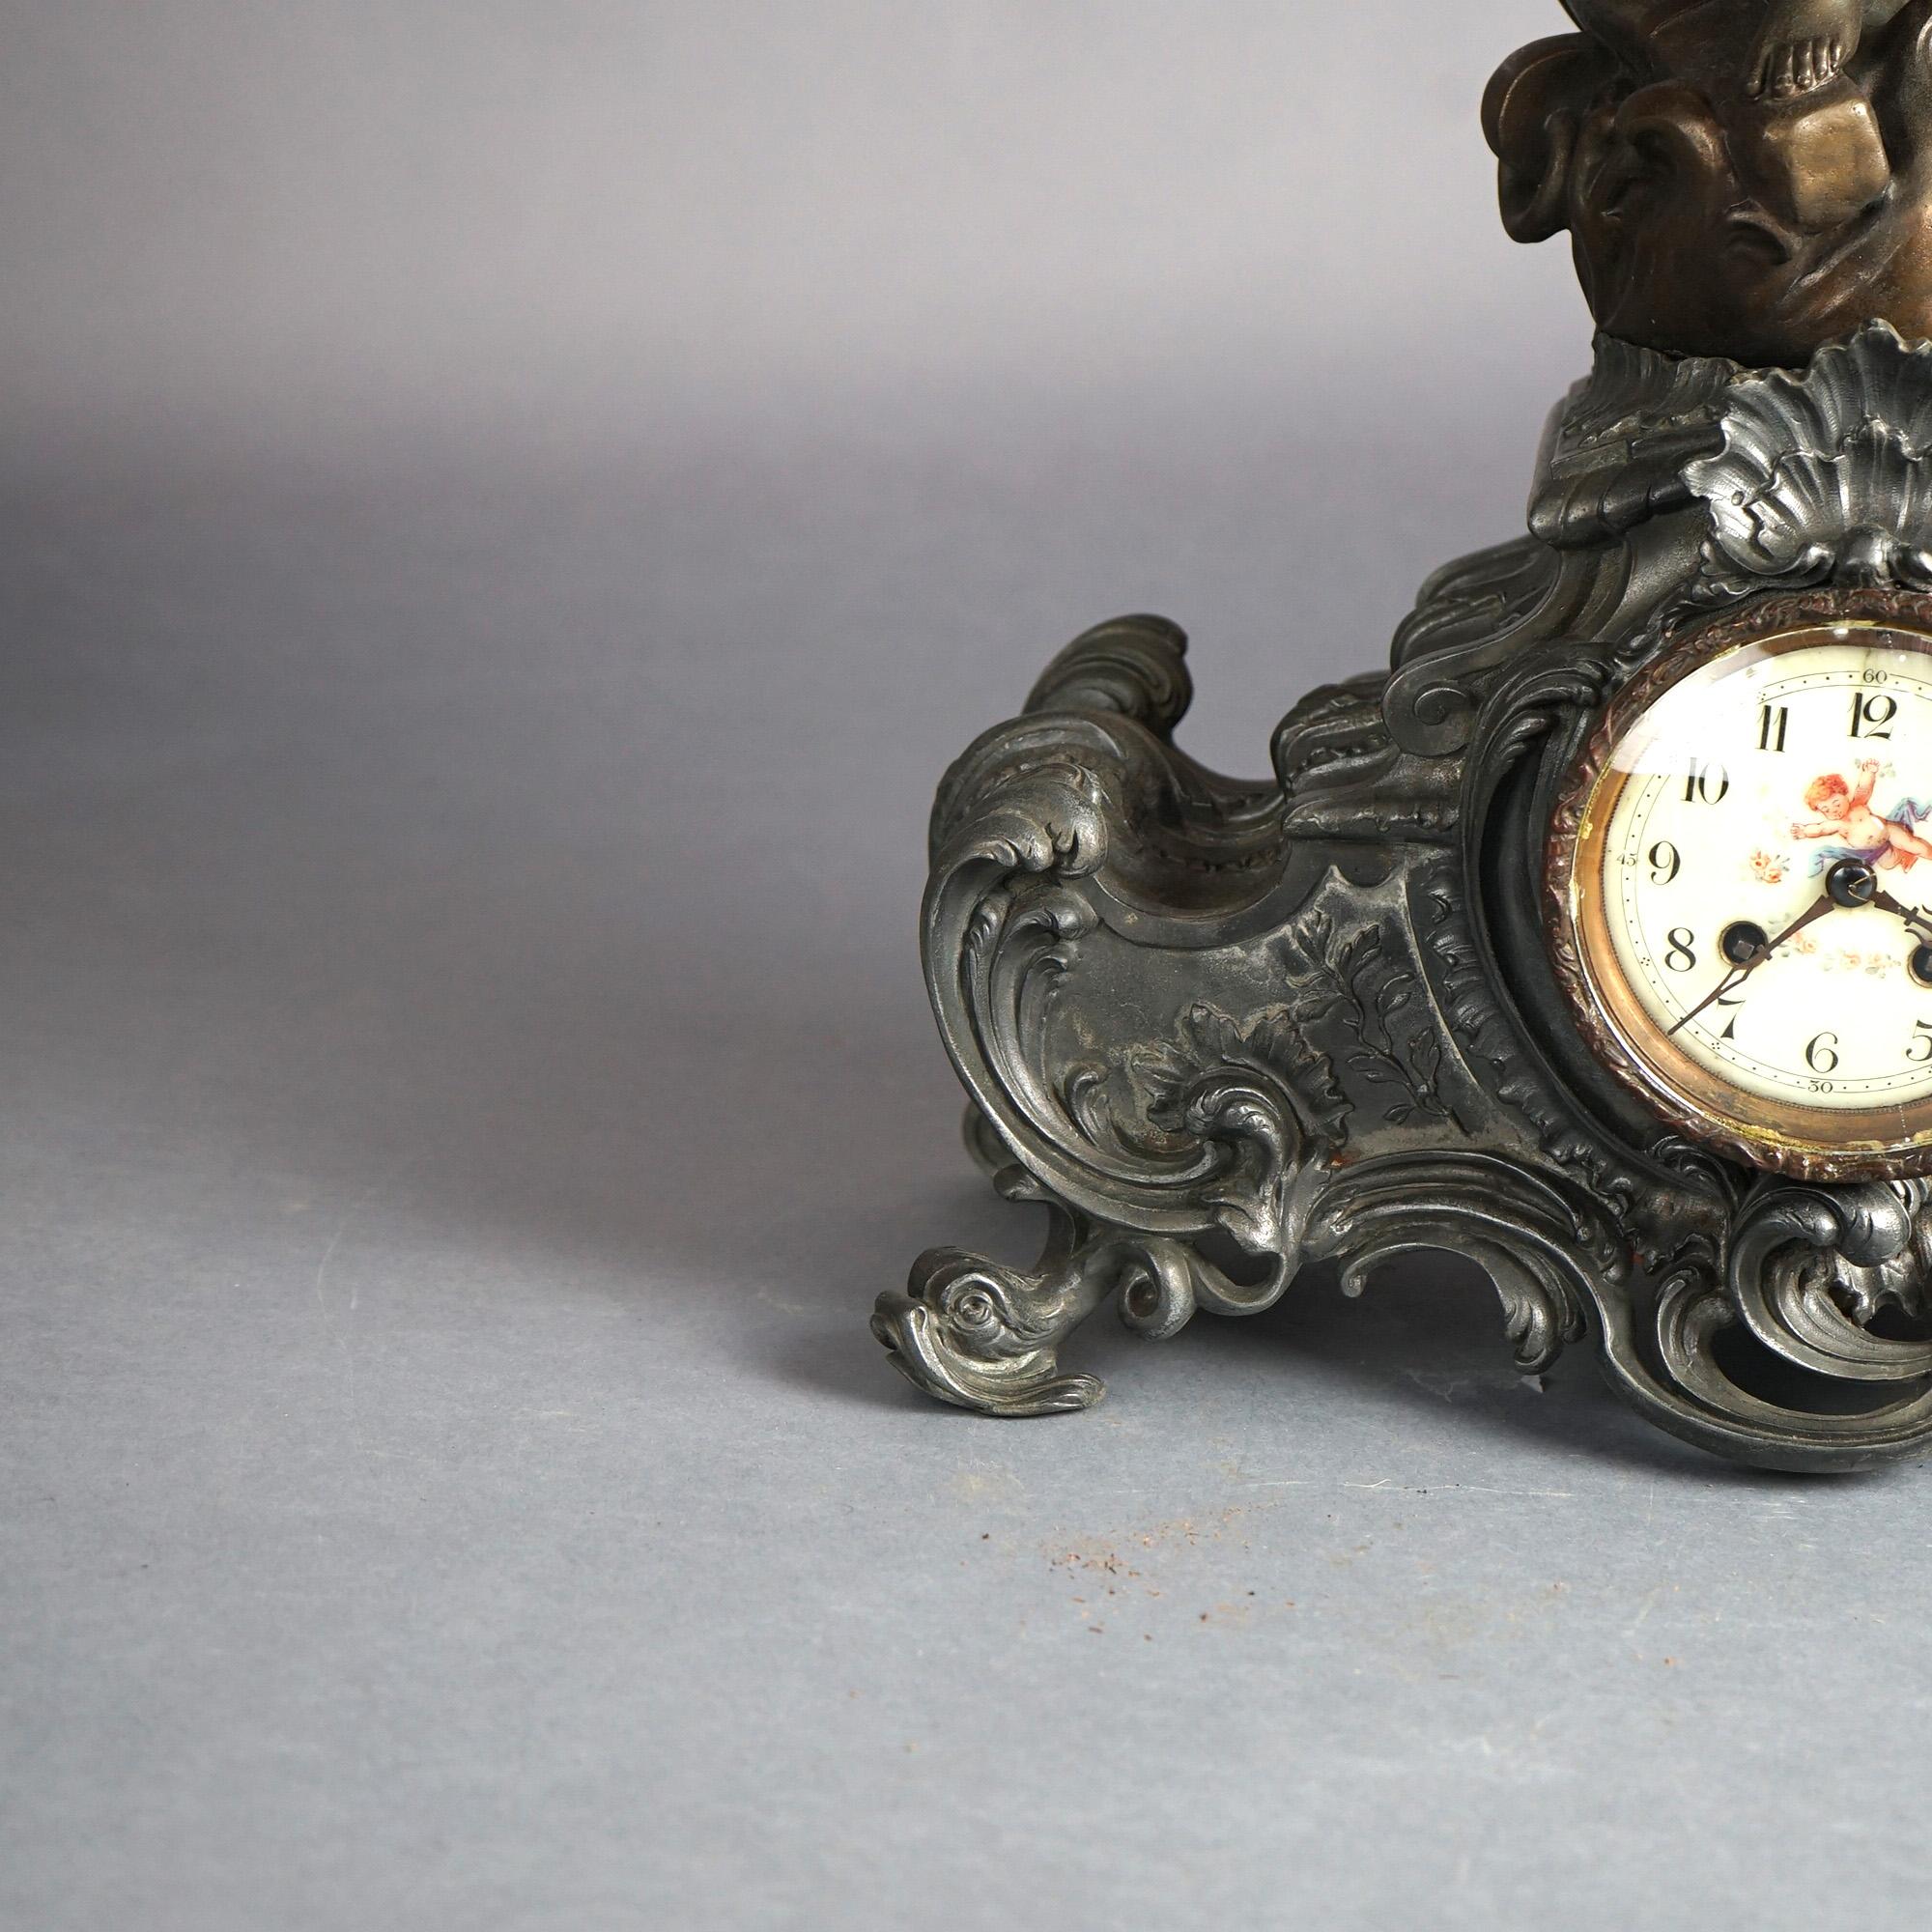 Antique Rococo Revival Bronzed Metal Figural Mantle Clock Signed Rancoulet C1890 4